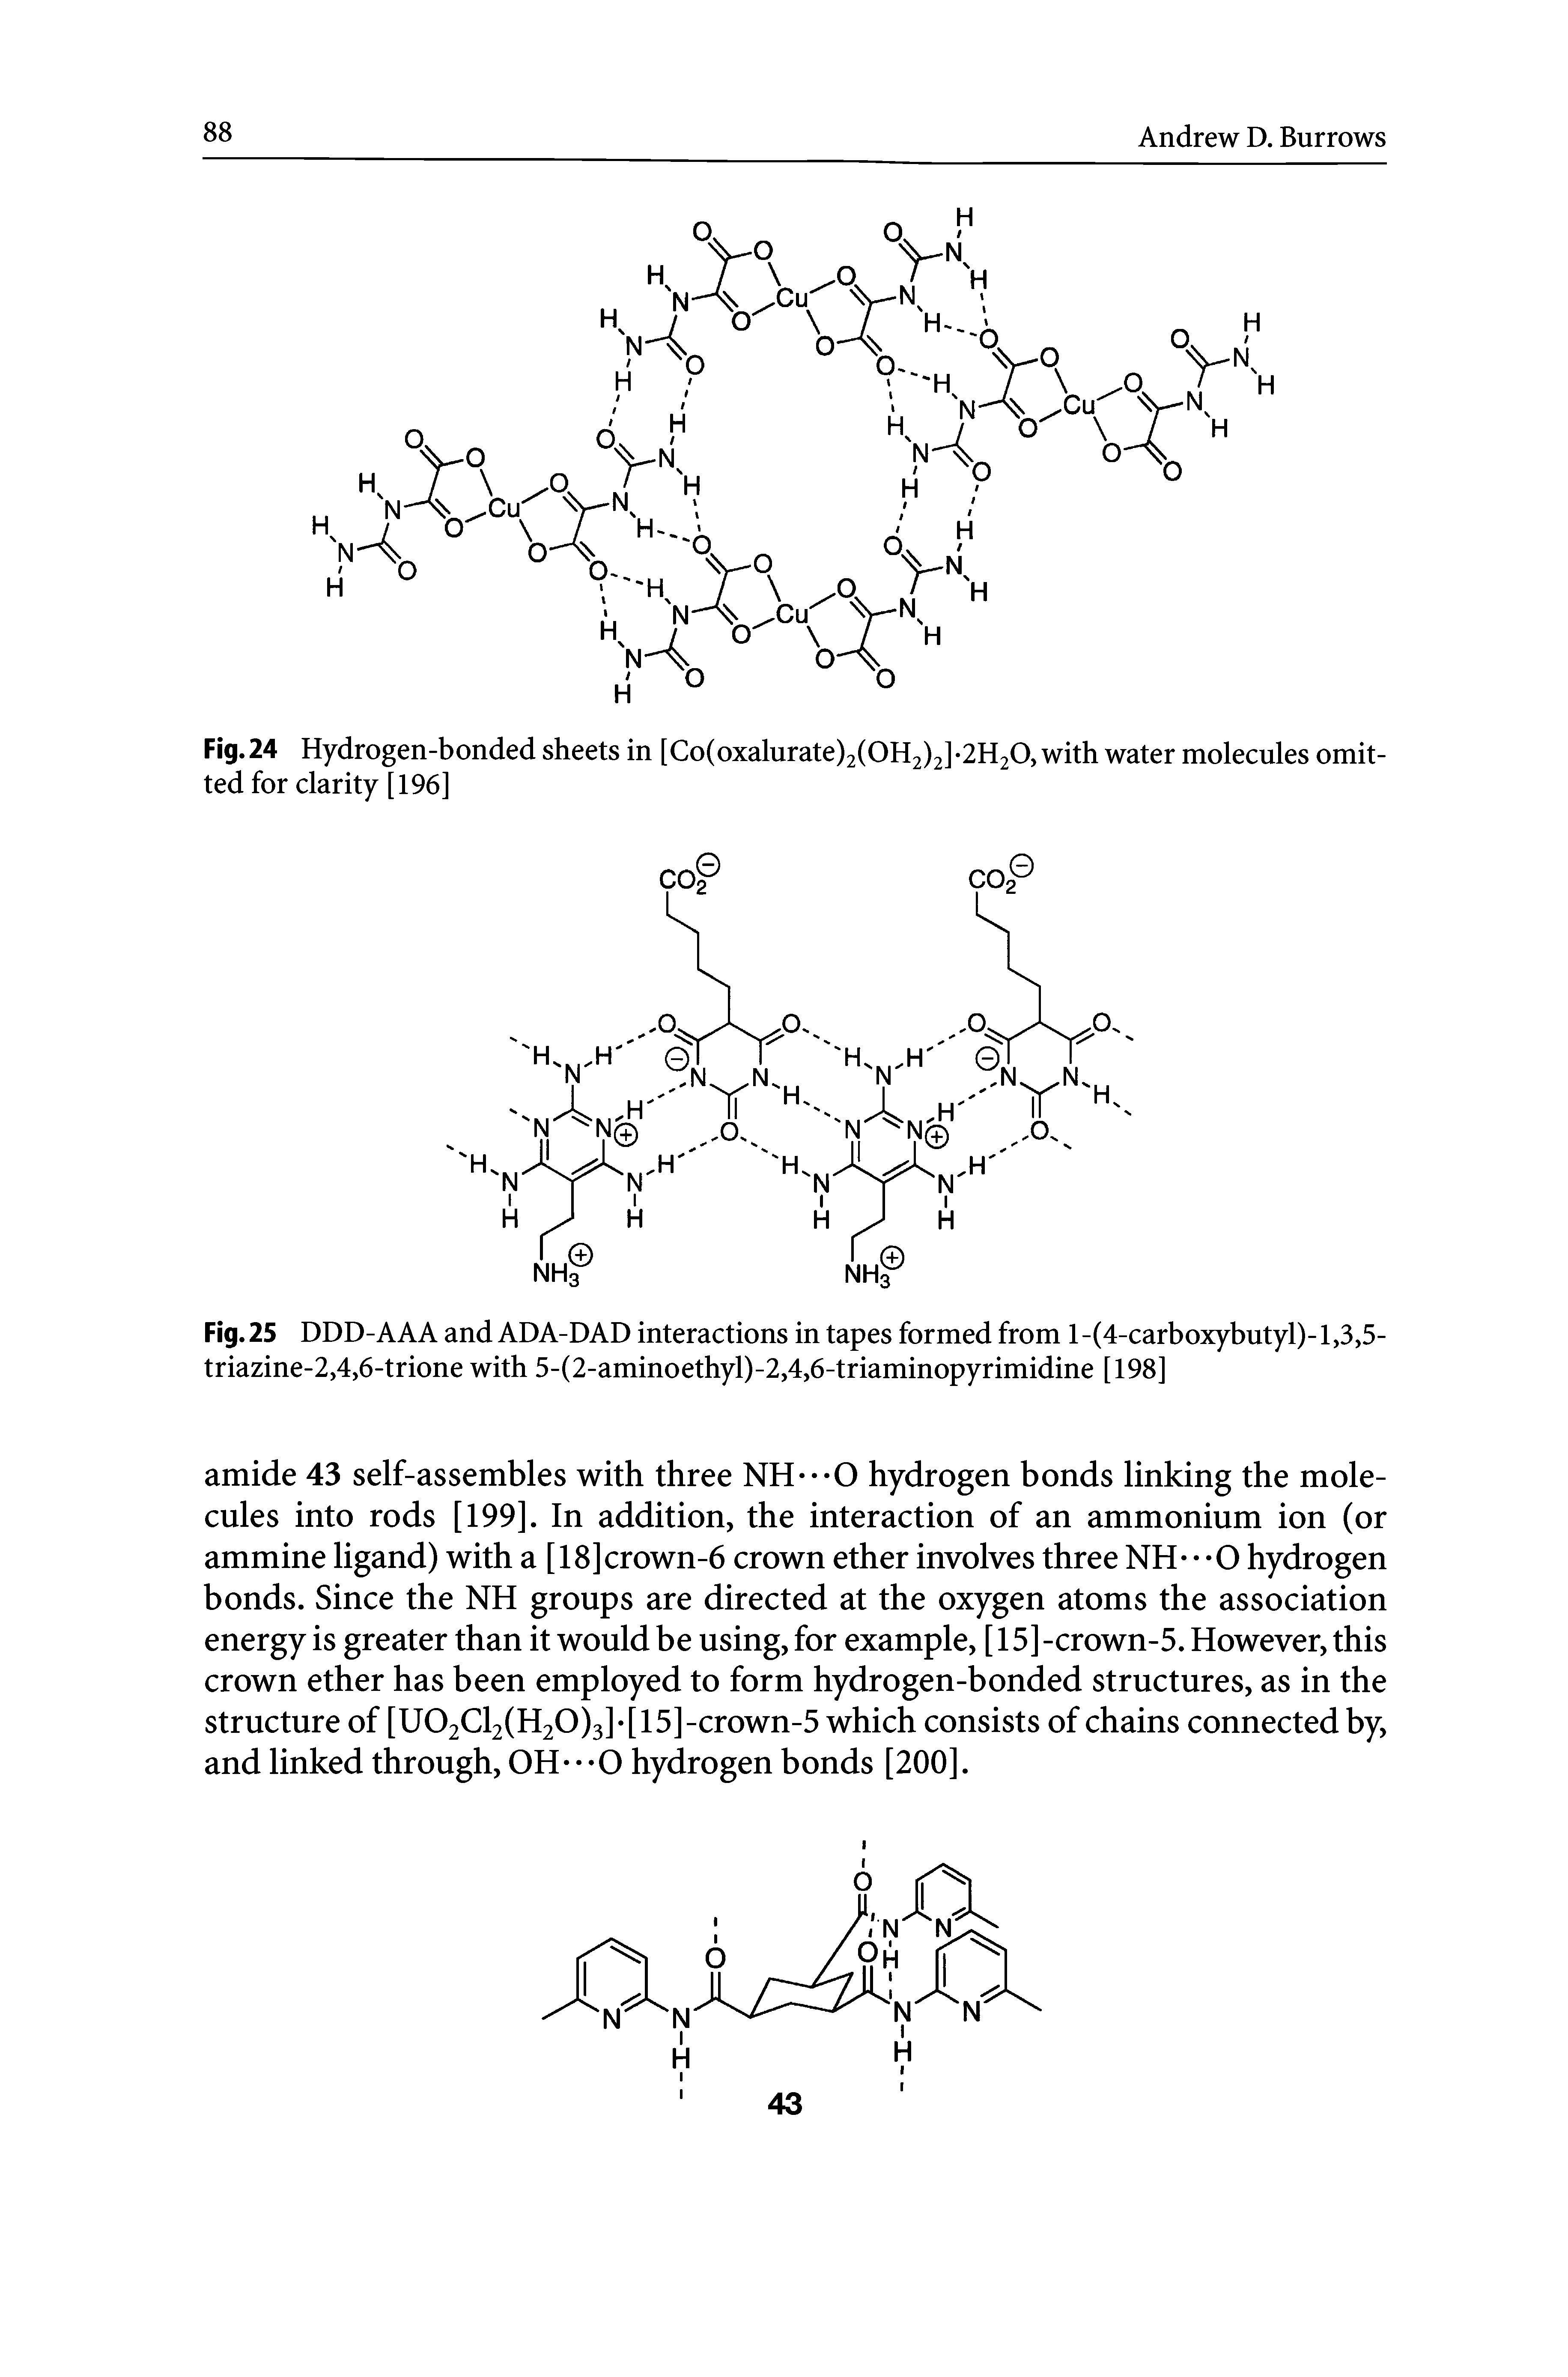 Fig. 25 DDD-AAA and ADA-DAD interactions in tapes formed from 1-(4-carboxybutyl)-1,3,5-triazine-2,4,6-trione with 5-(2-aminoethyl)-2,4,6-triaminopyrimidine [198]...